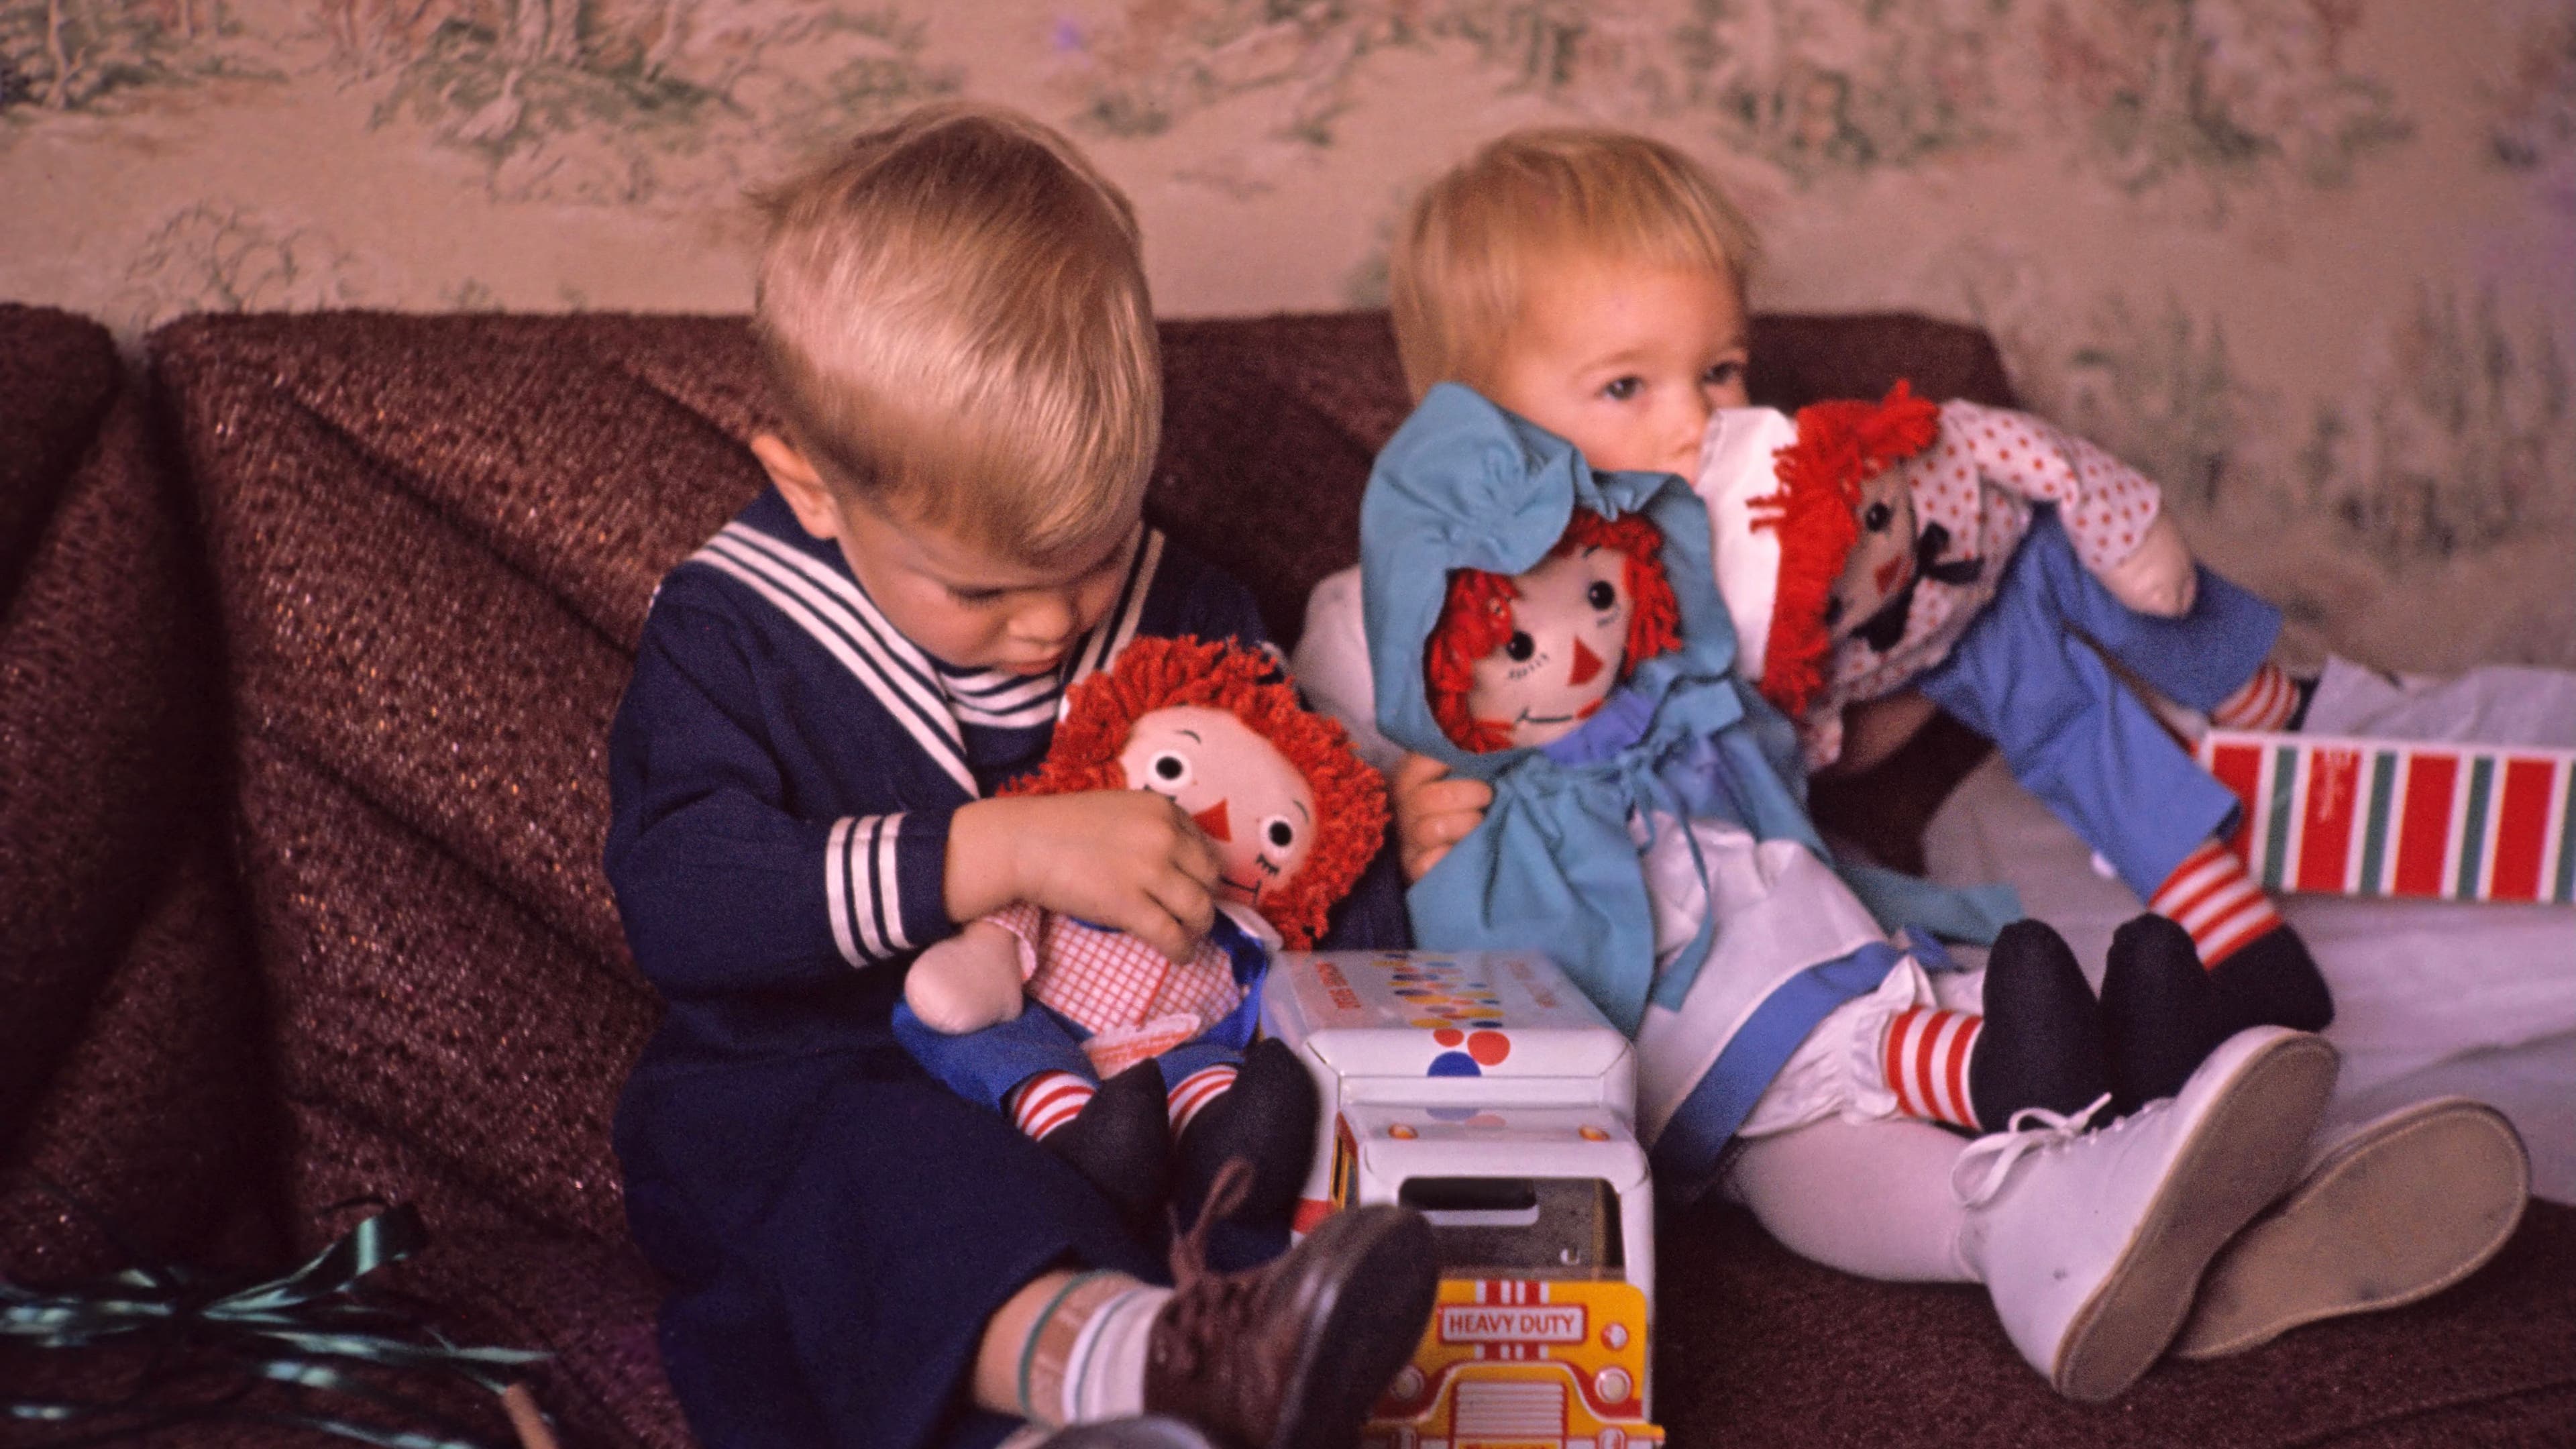 Vintage Christmas picture from 1960 of a boy and girl with Raggedy Ann and Raggedy Andy dolls